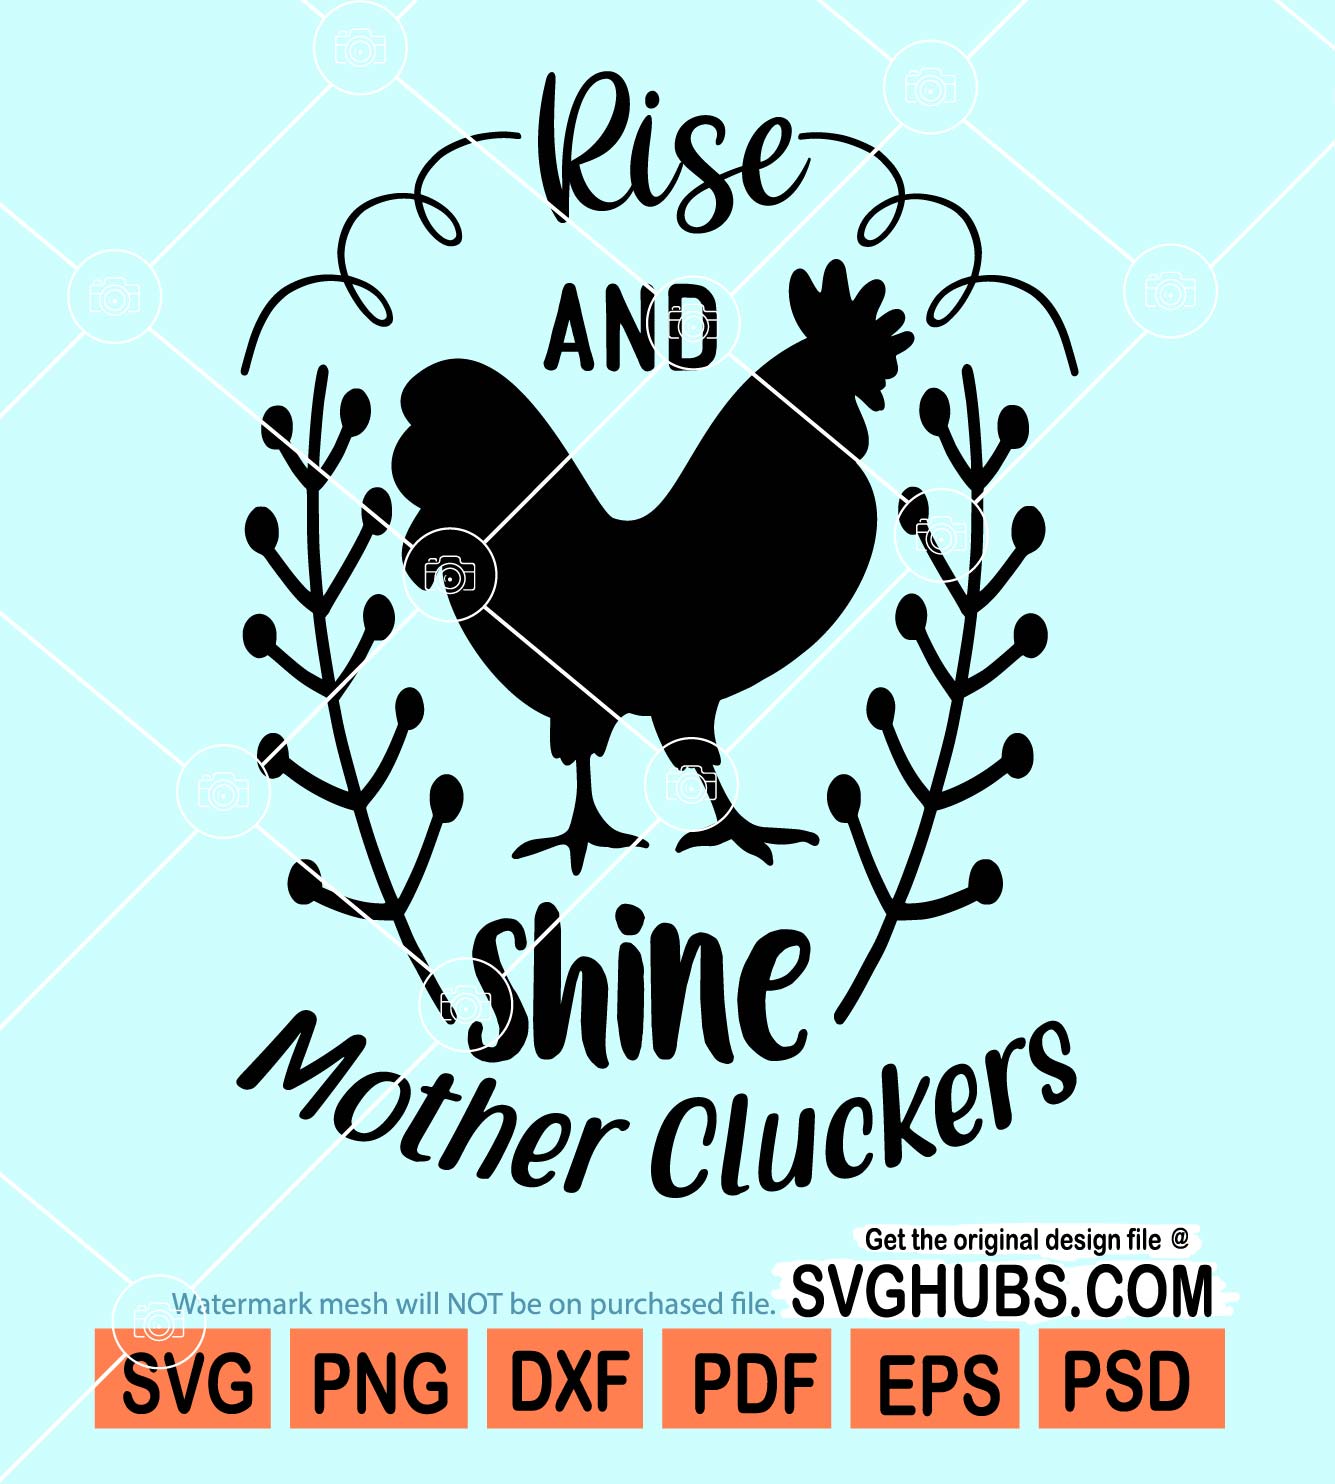 Rise and shine mother cluckers svg